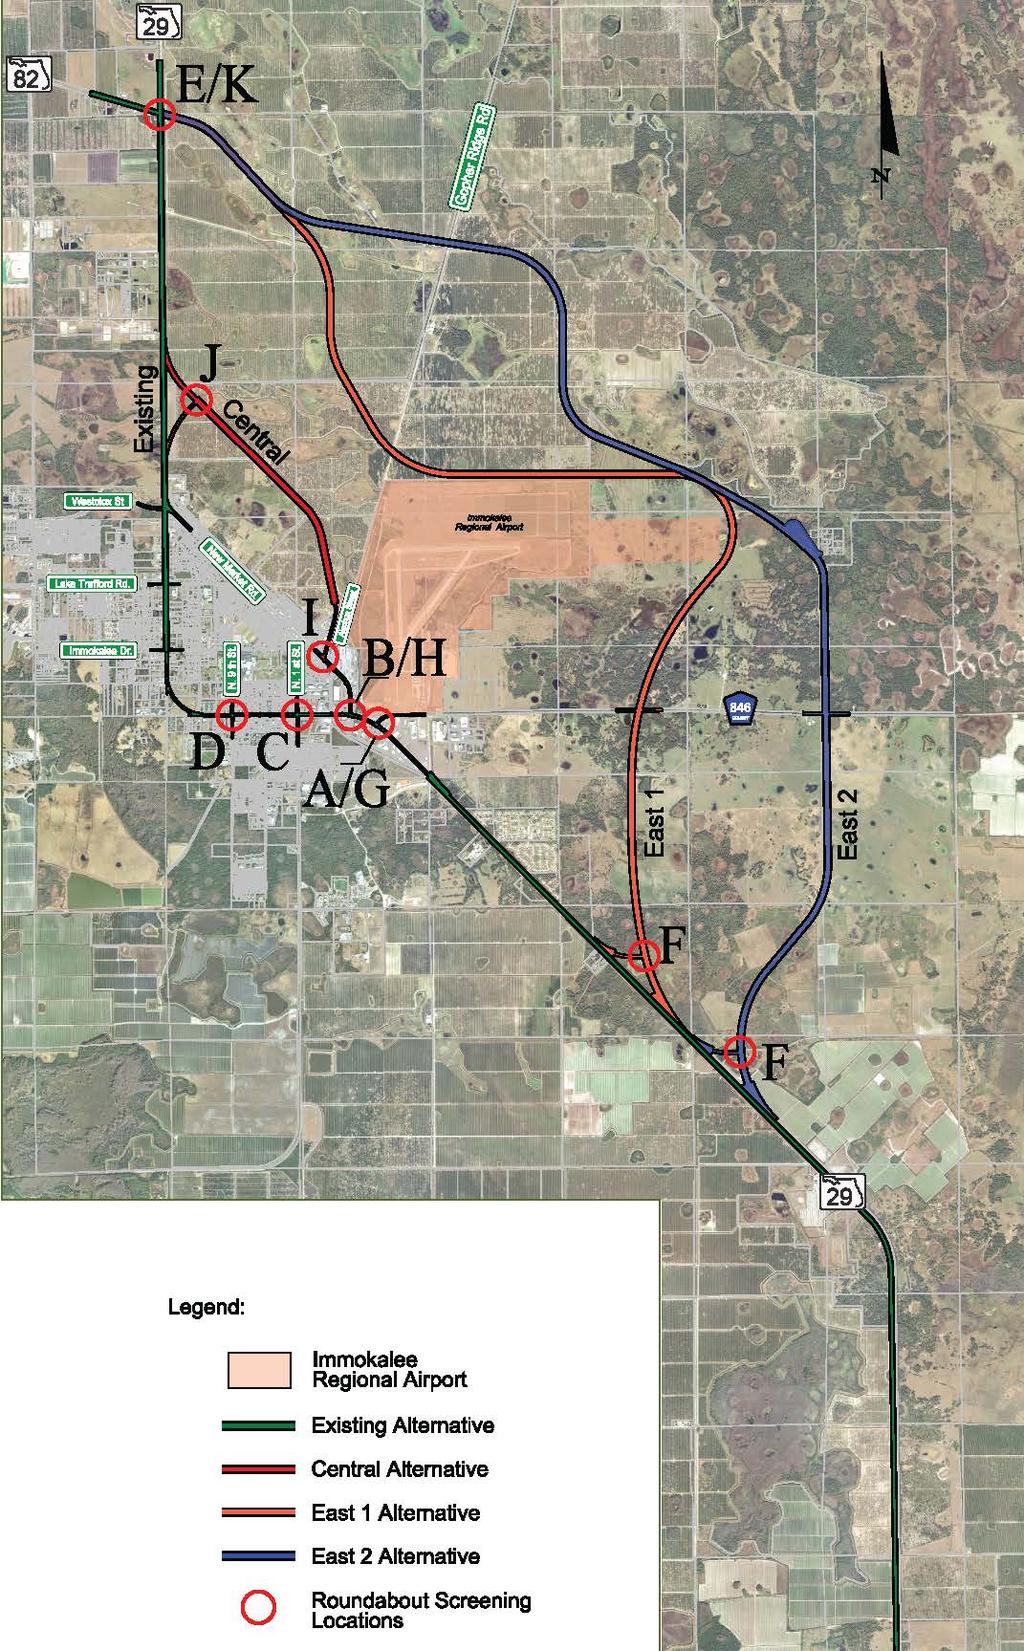 Exhibit 1 SR 29 Alternatives and Potential Roundabout Locations